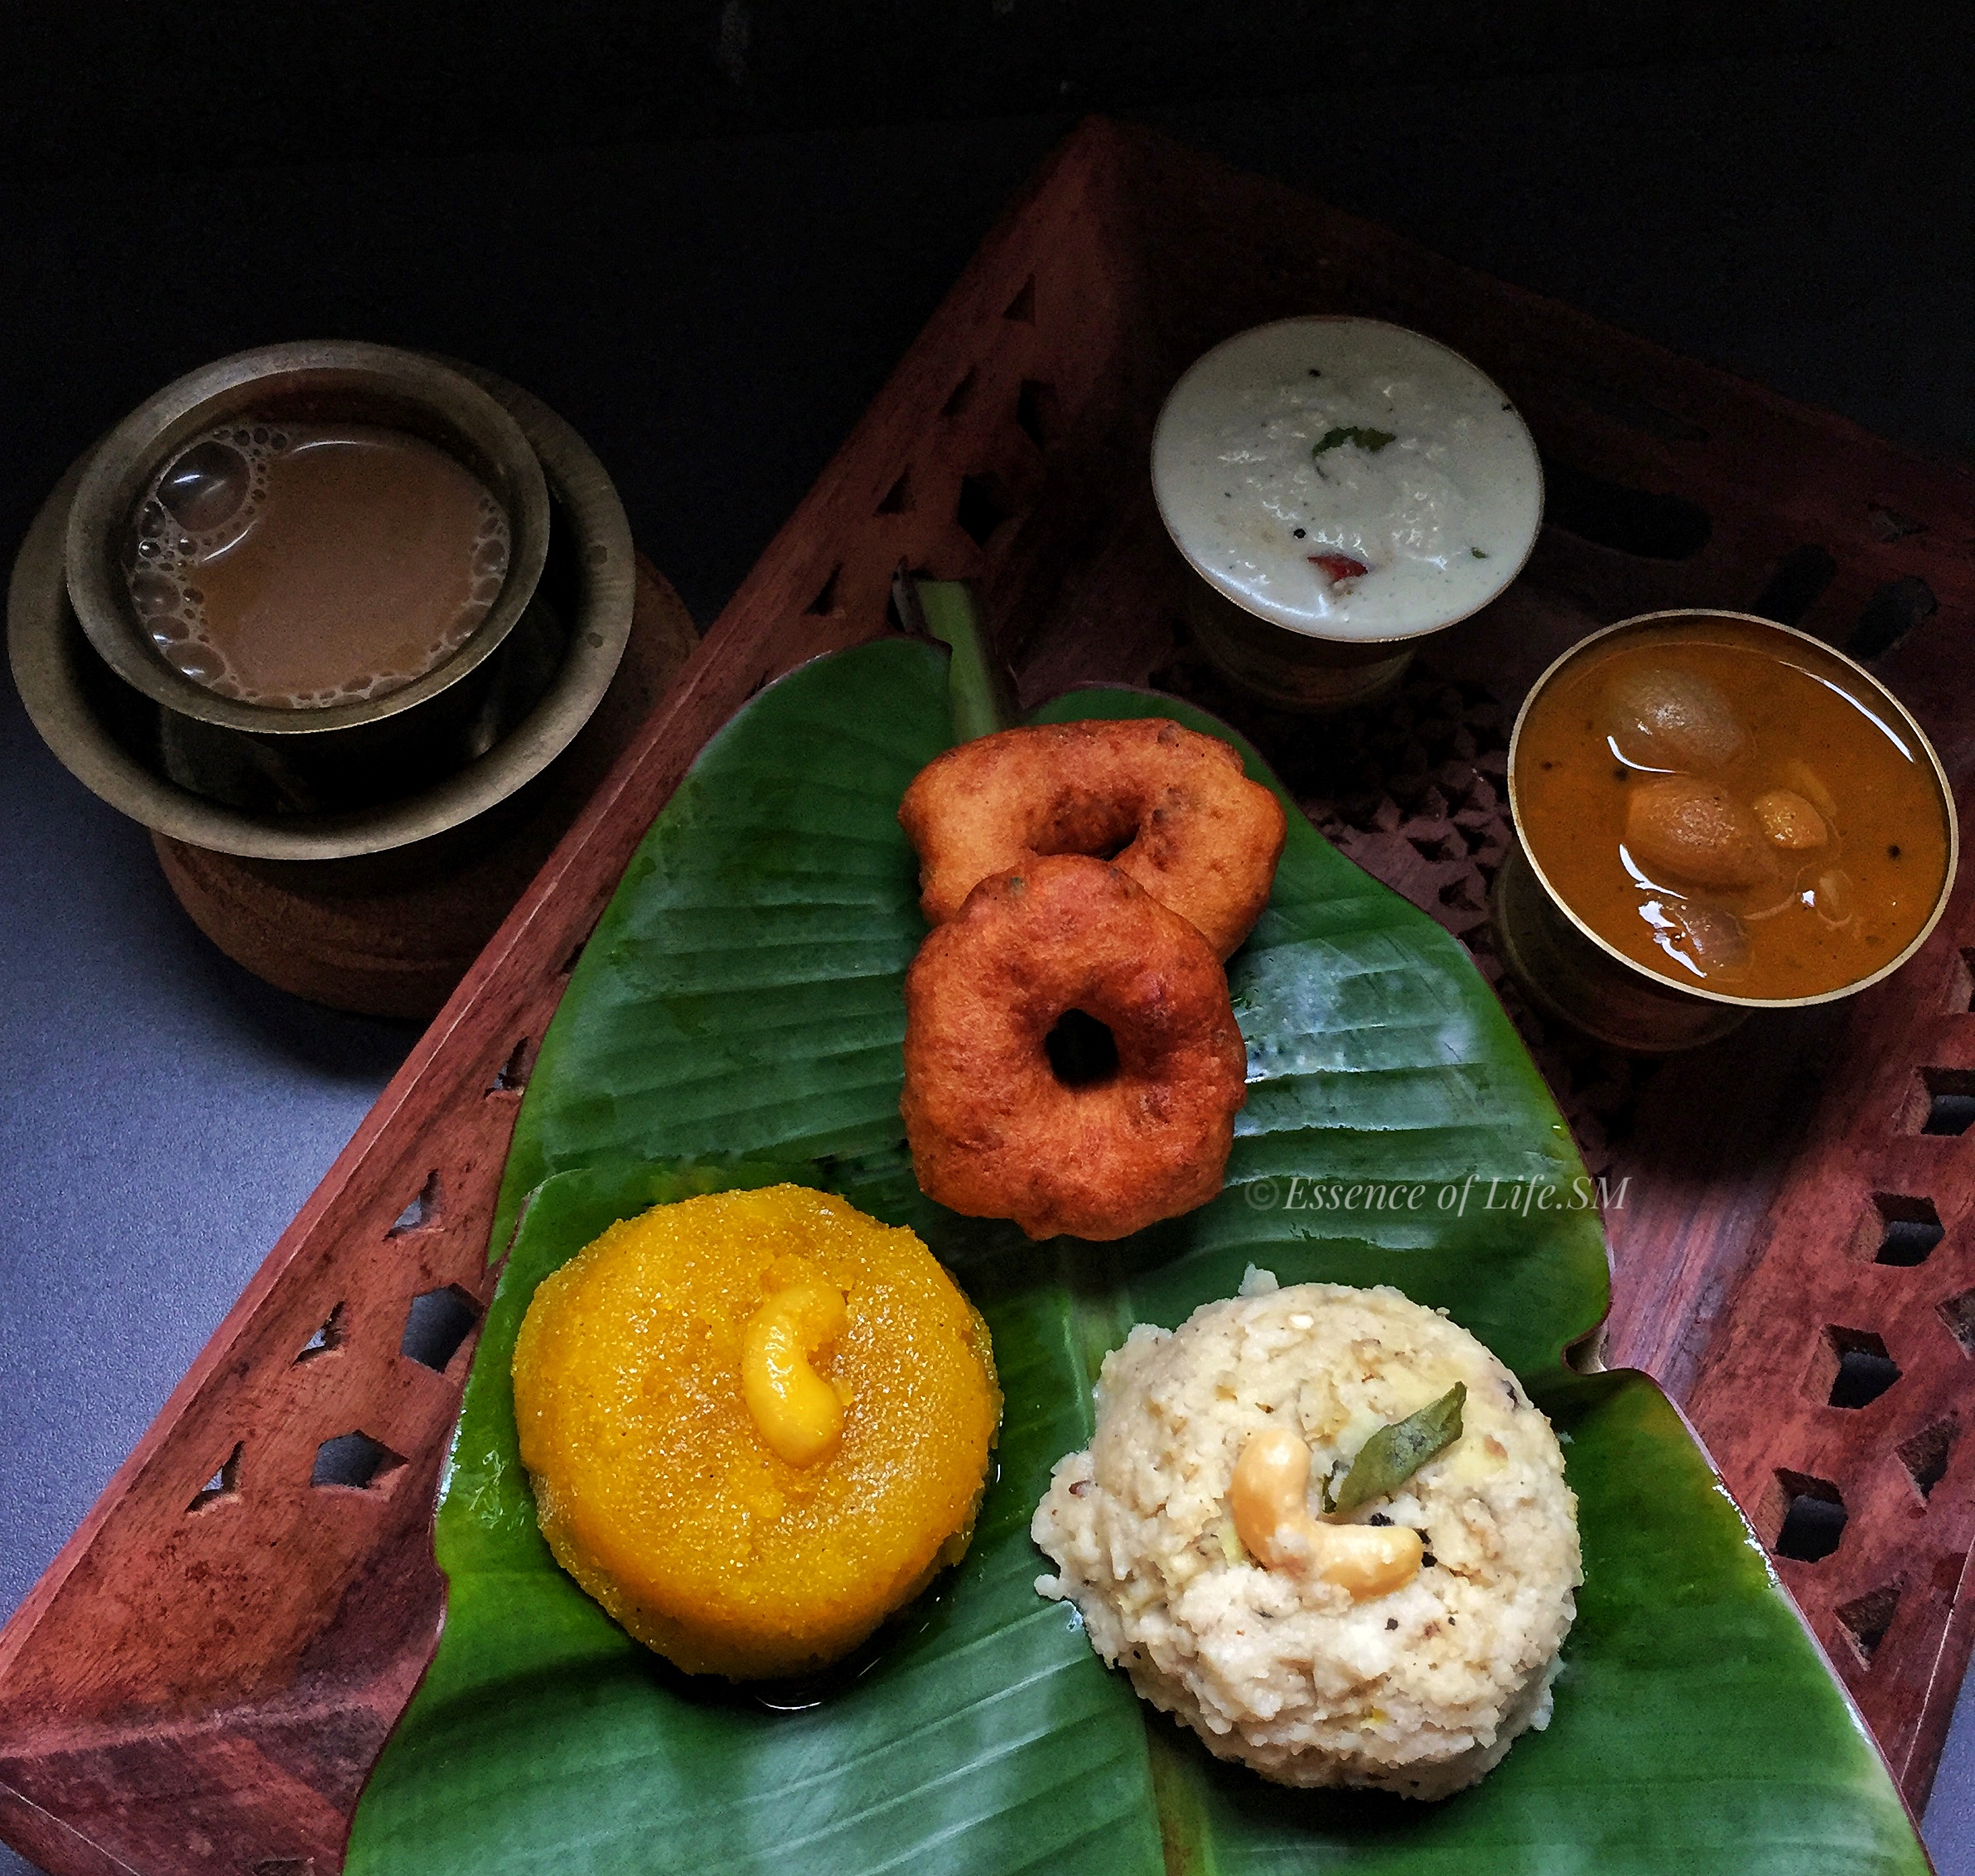 Filter Coffee, South Indian Coffee, Eat More Art, Recipe